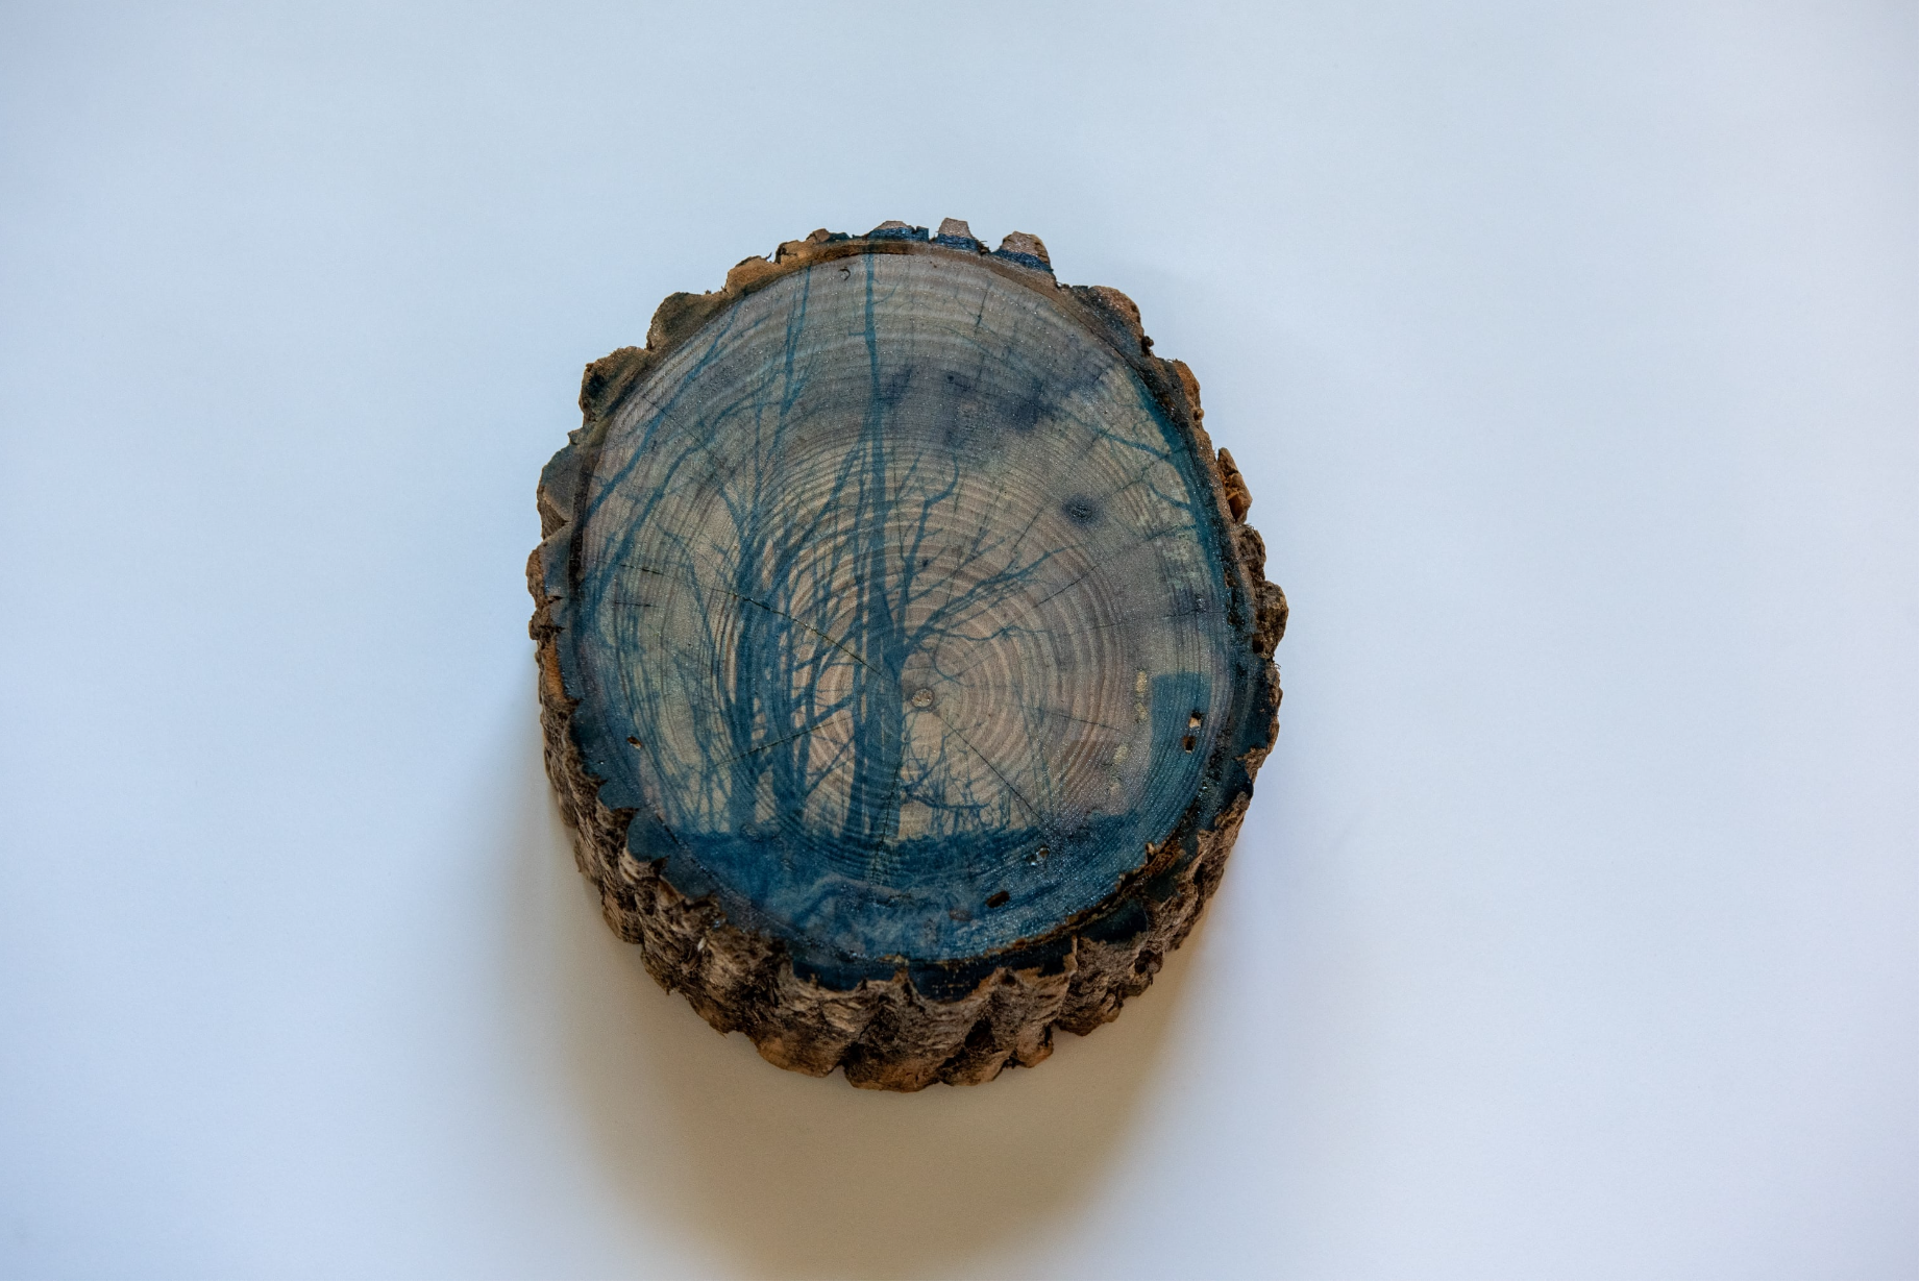 Baring Ash Wood Section 4 _3 Inch-0001 by Laurie Beck Peterson